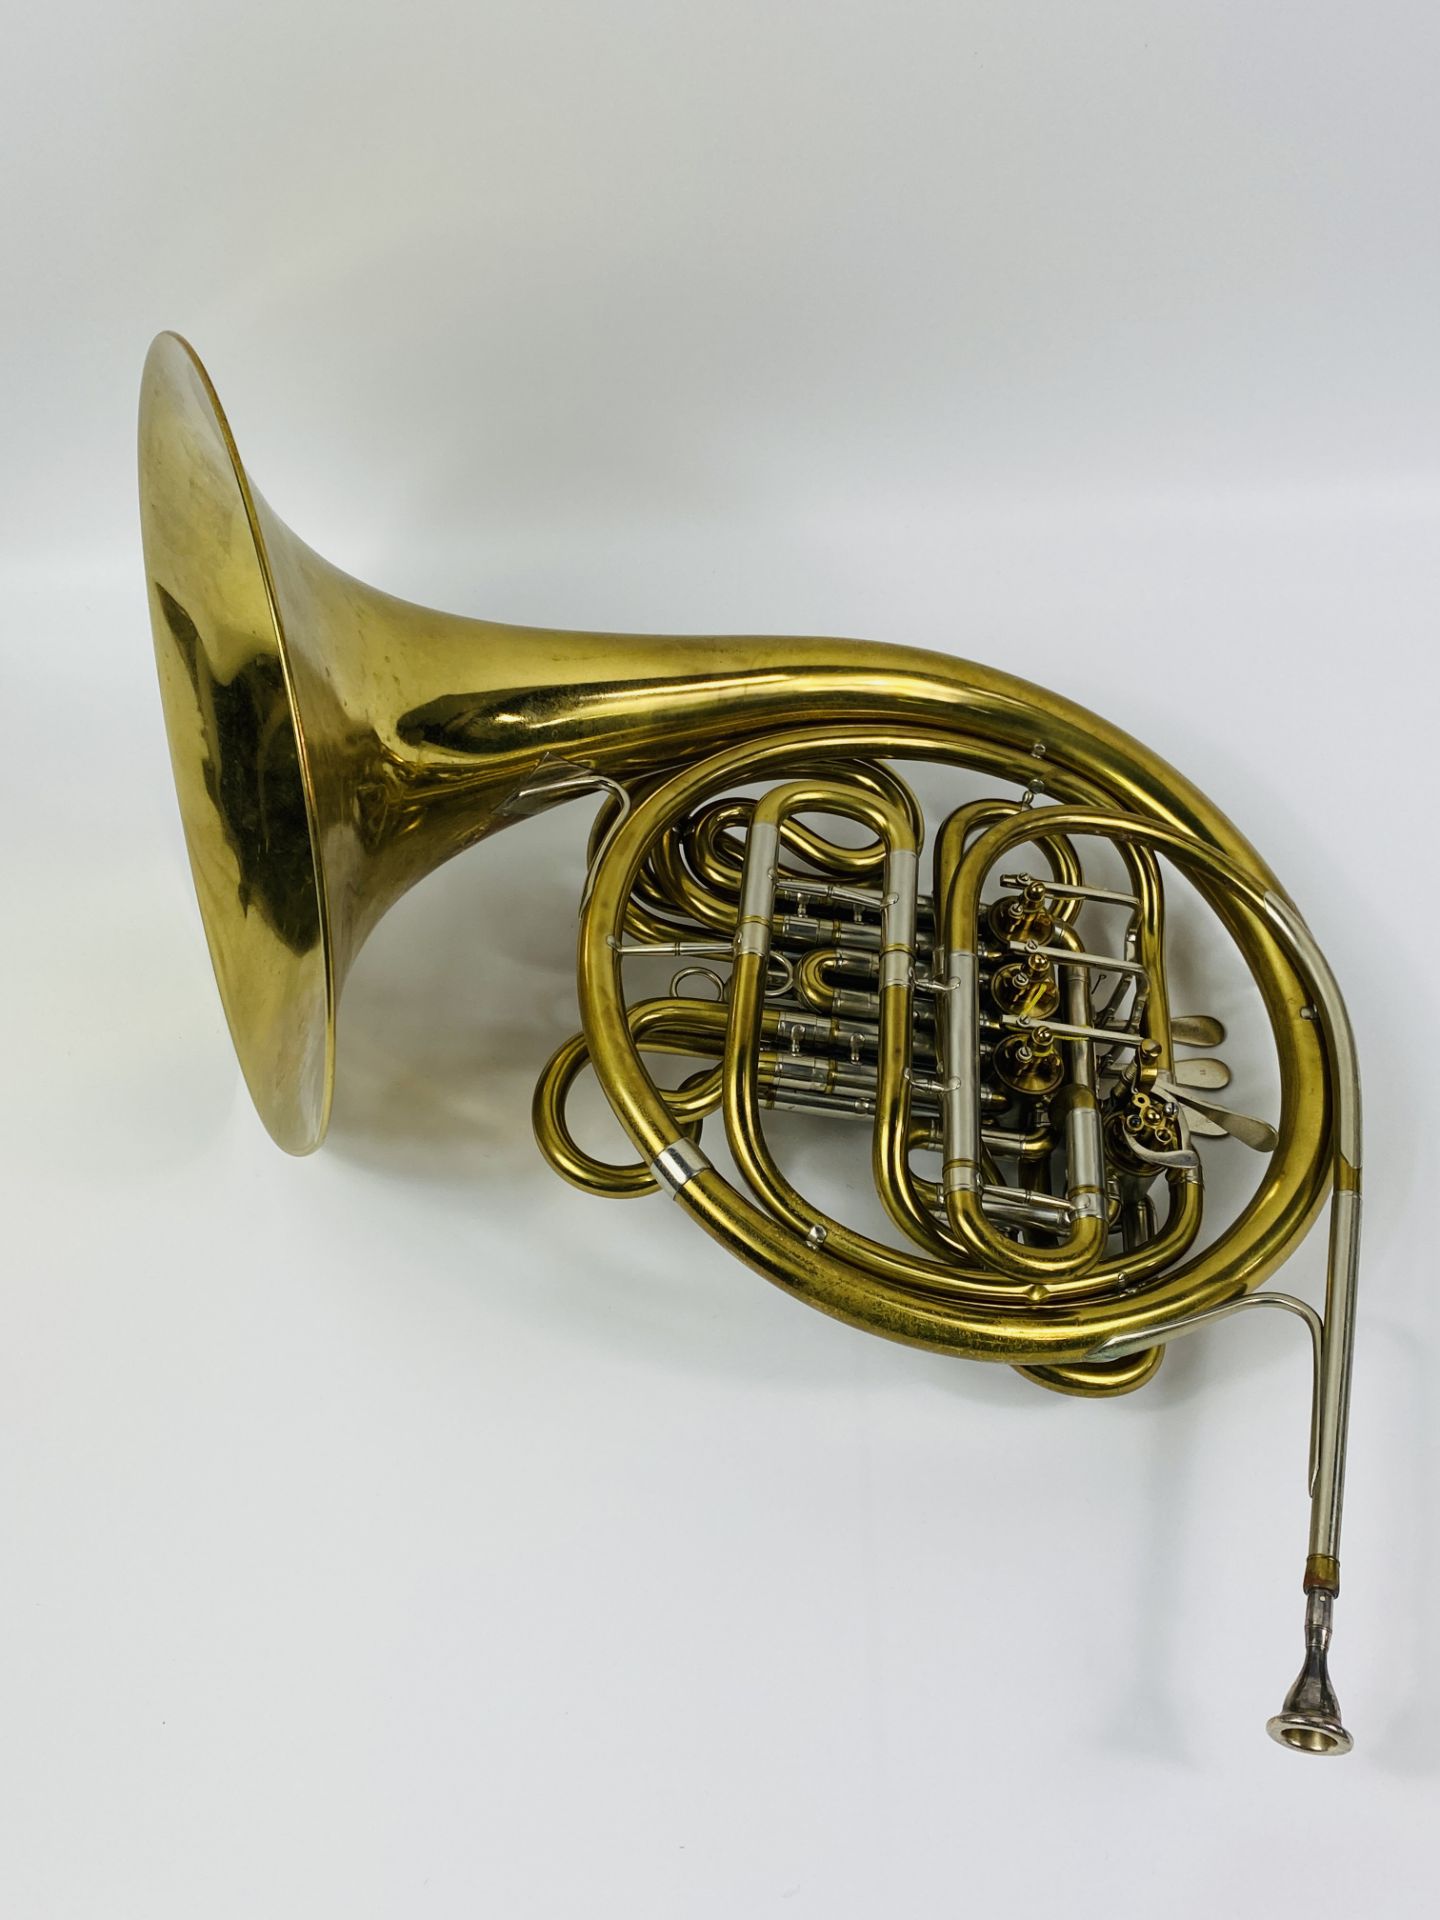 French horn in carry case - Image 8 of 8